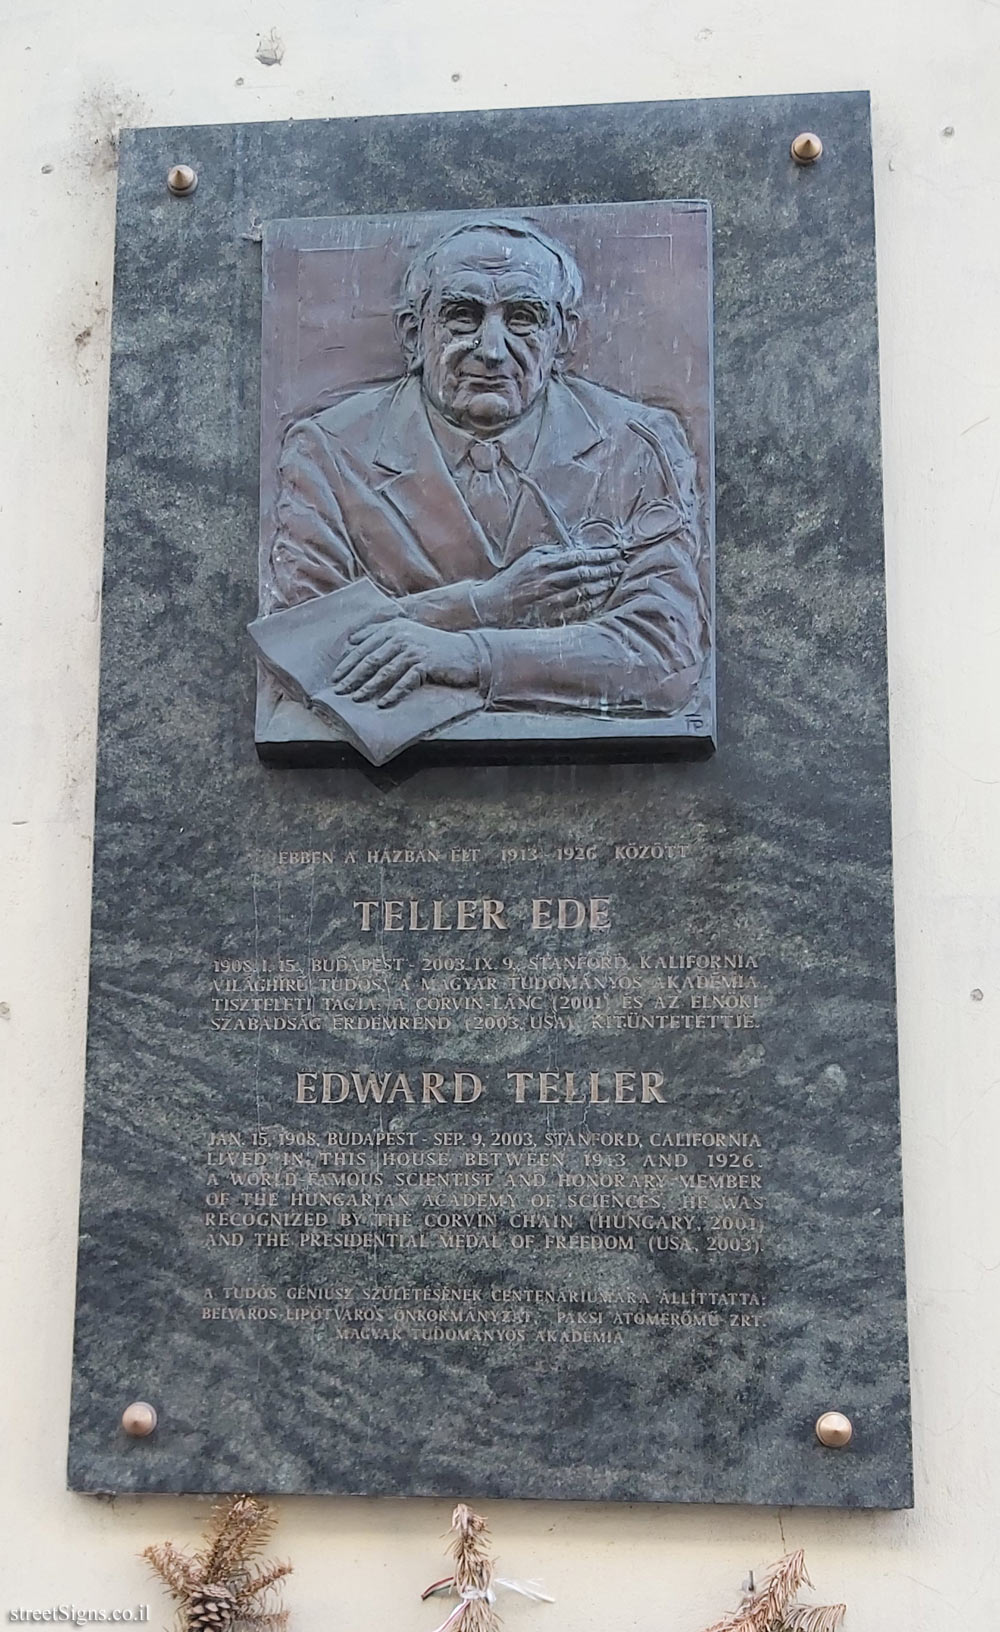 Budapest - Memorial plaque in the home of Edward Teller